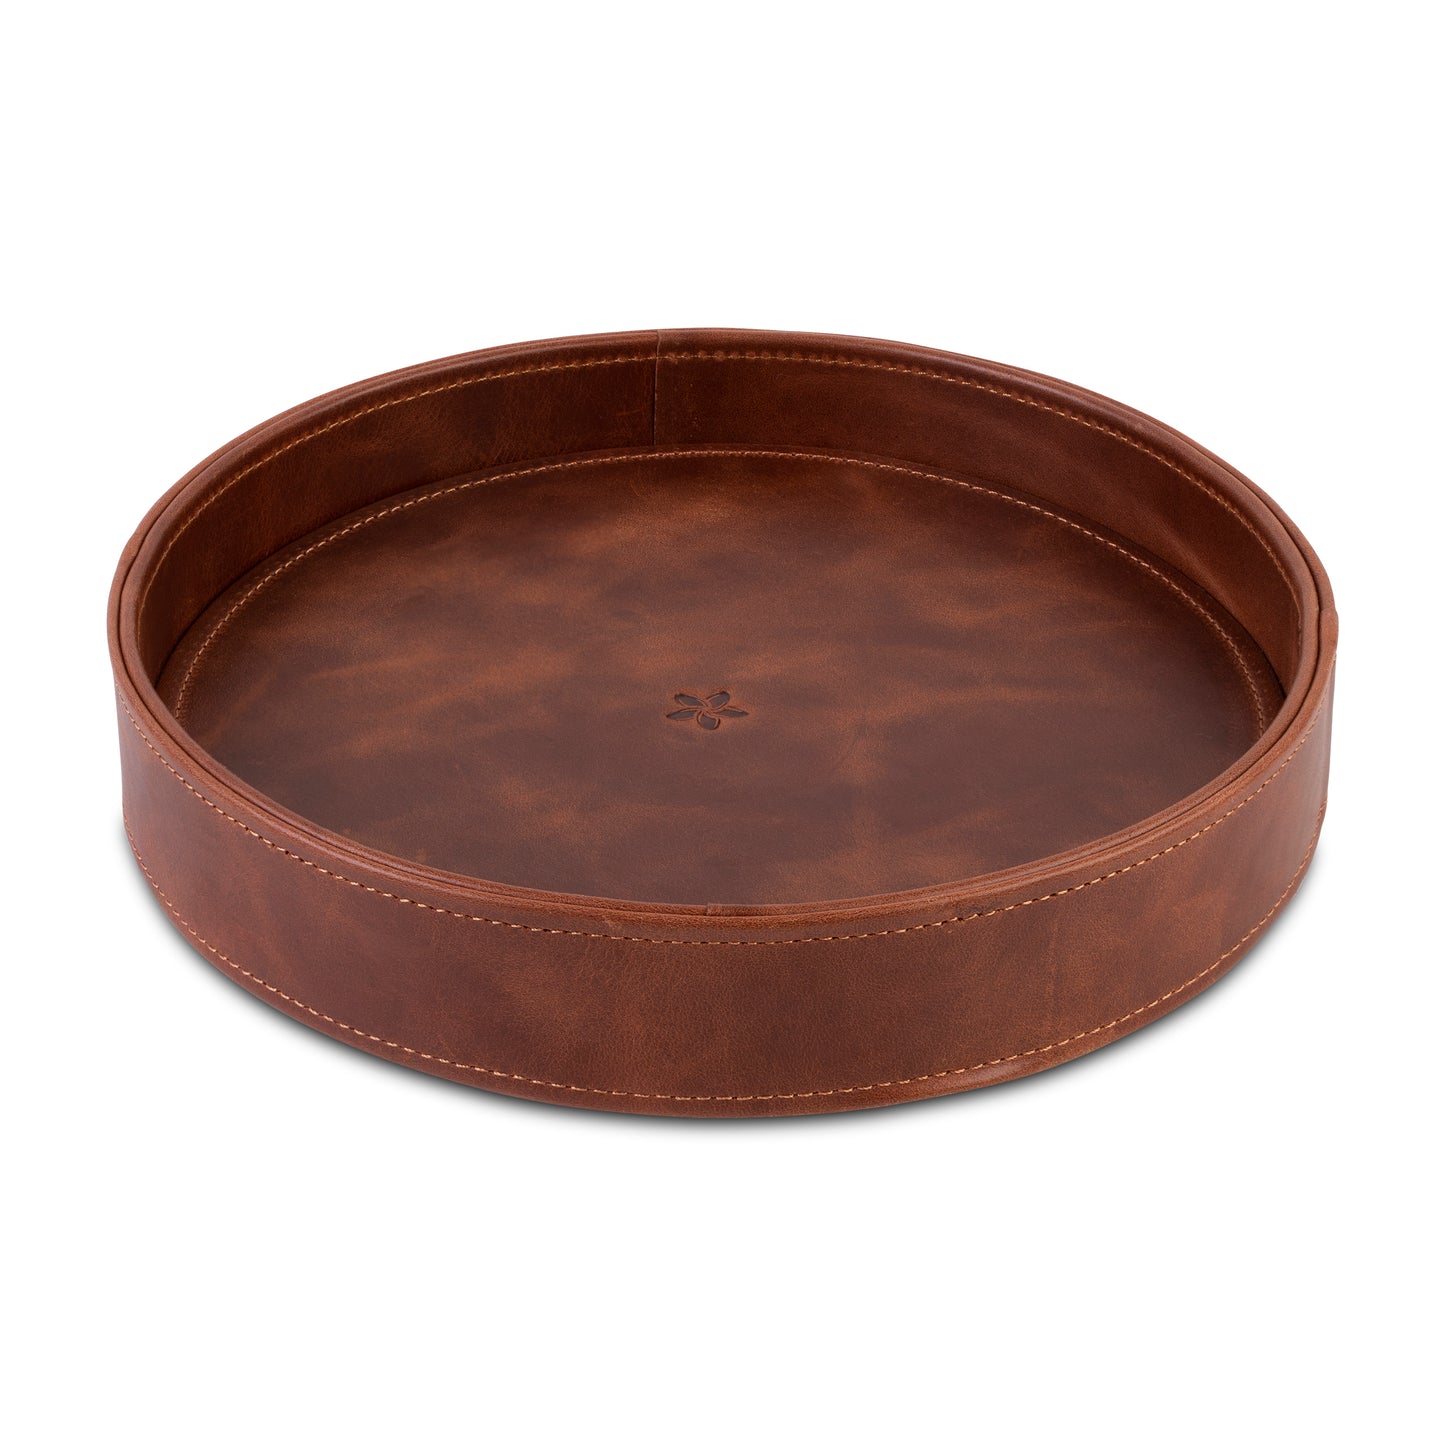 Full Leather Tray - Round Tablet